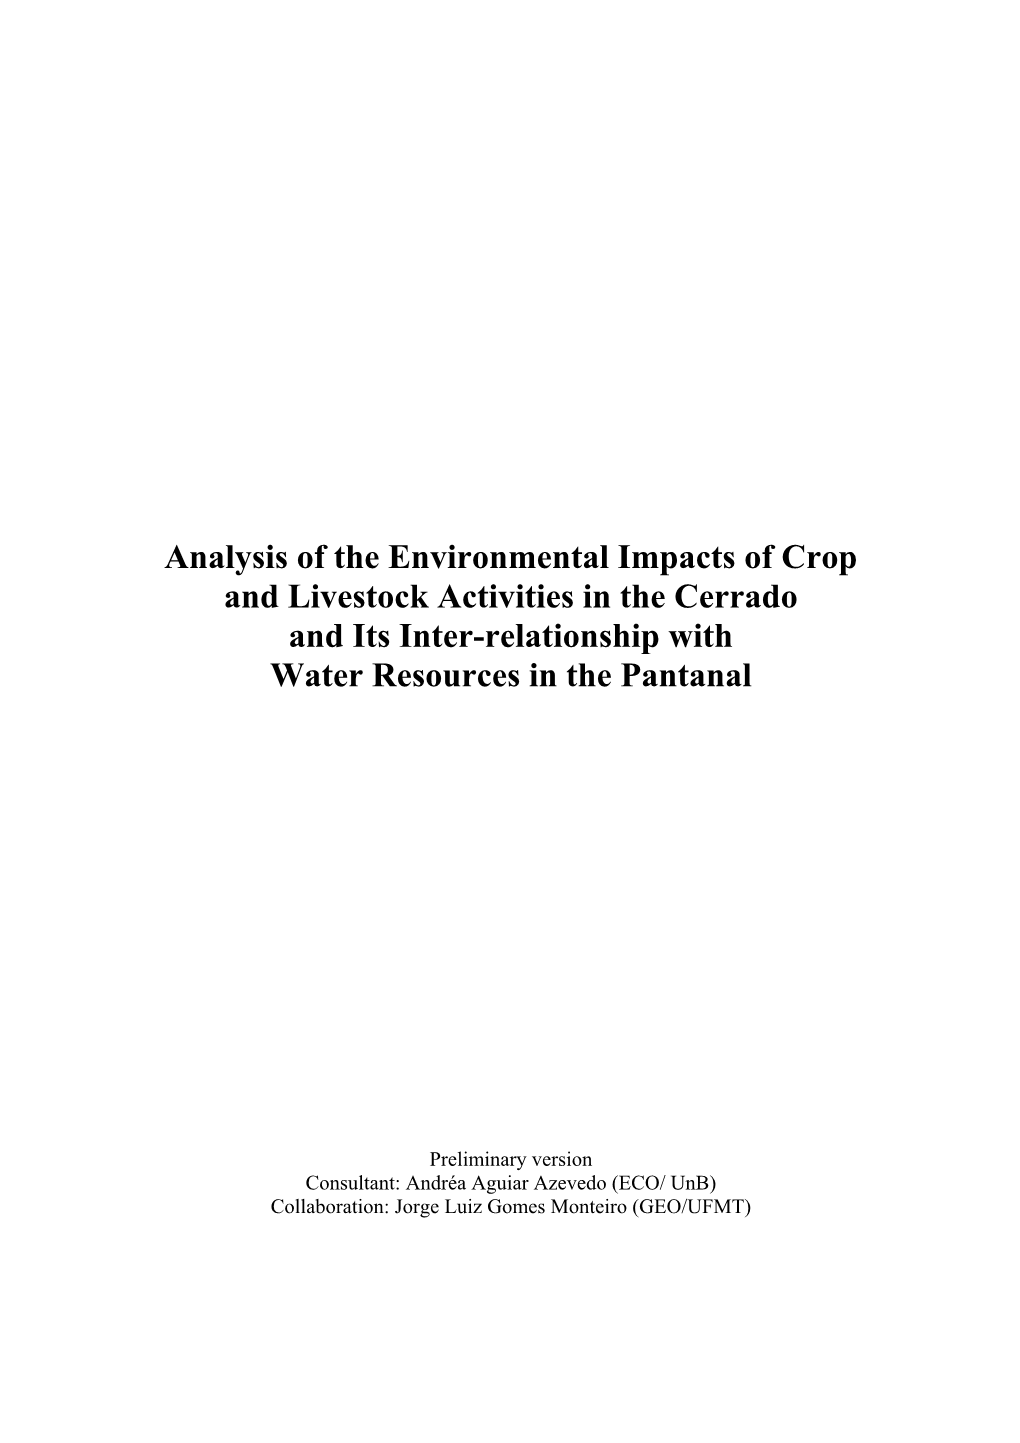 Analysis of the Environmental Impacts of Crop and Livestock Activities in the Cerrado and Its Inter-Relationship with Water Resources in the Pantanal